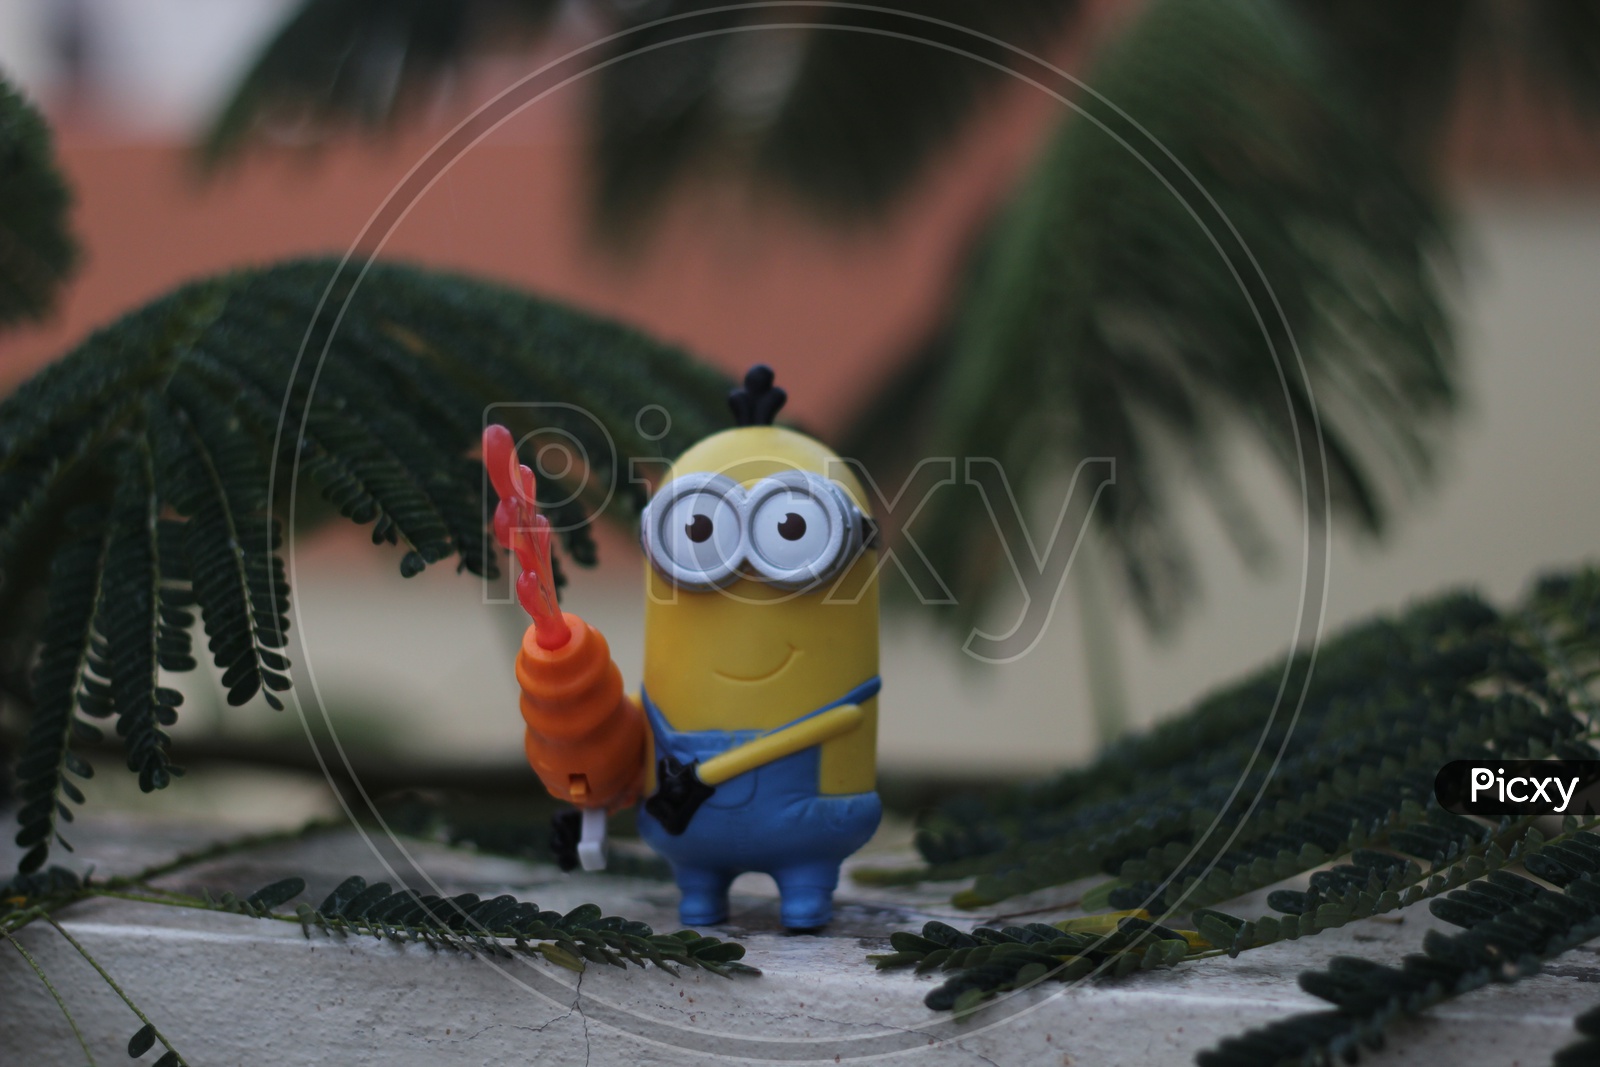 Toy Minion on the terrace between the leaves